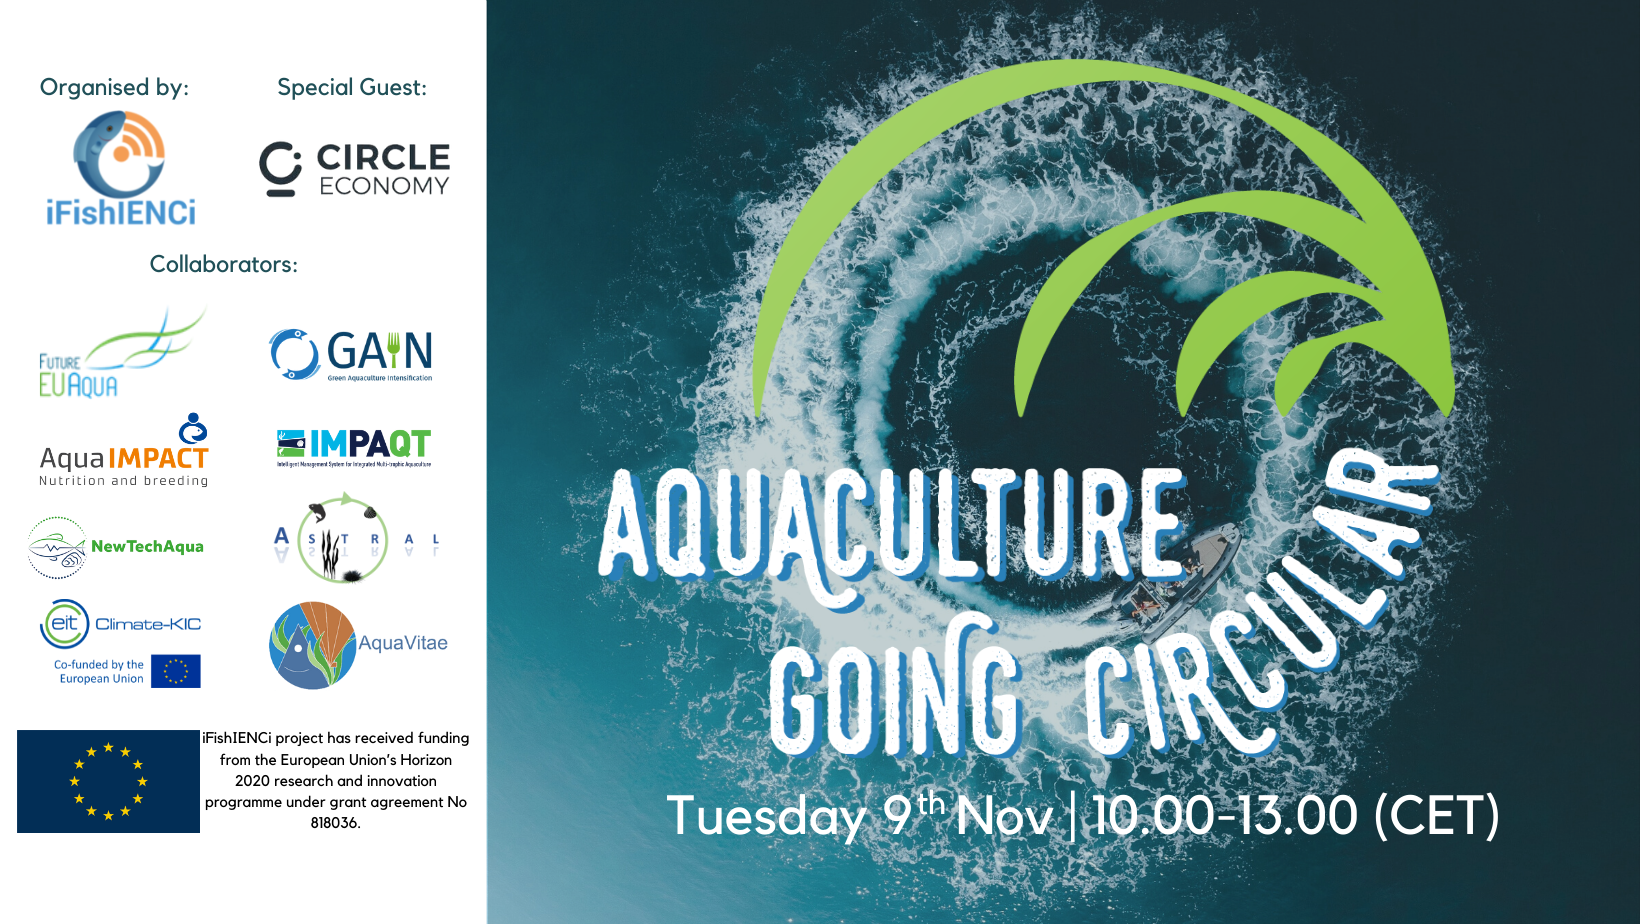 Aquaculture Going Circular- International audience of industry professionals, circularity experts and researchers targeted to develop policy messages on Circularity.